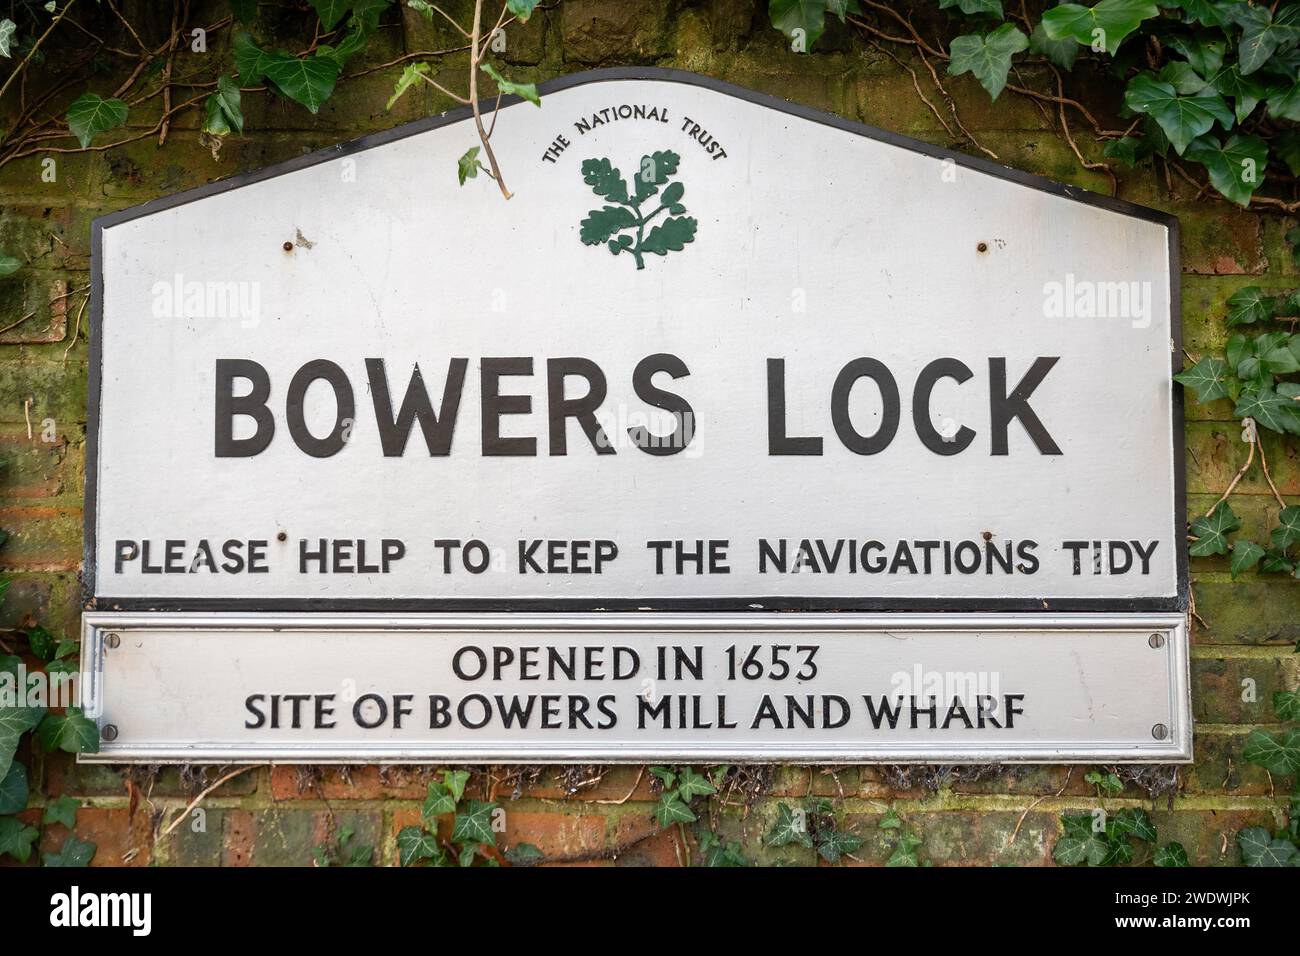 National Trust sign at Bowers Lock on the River Wey Navigations near Guildford, Surrey, England, UK Stock Photo